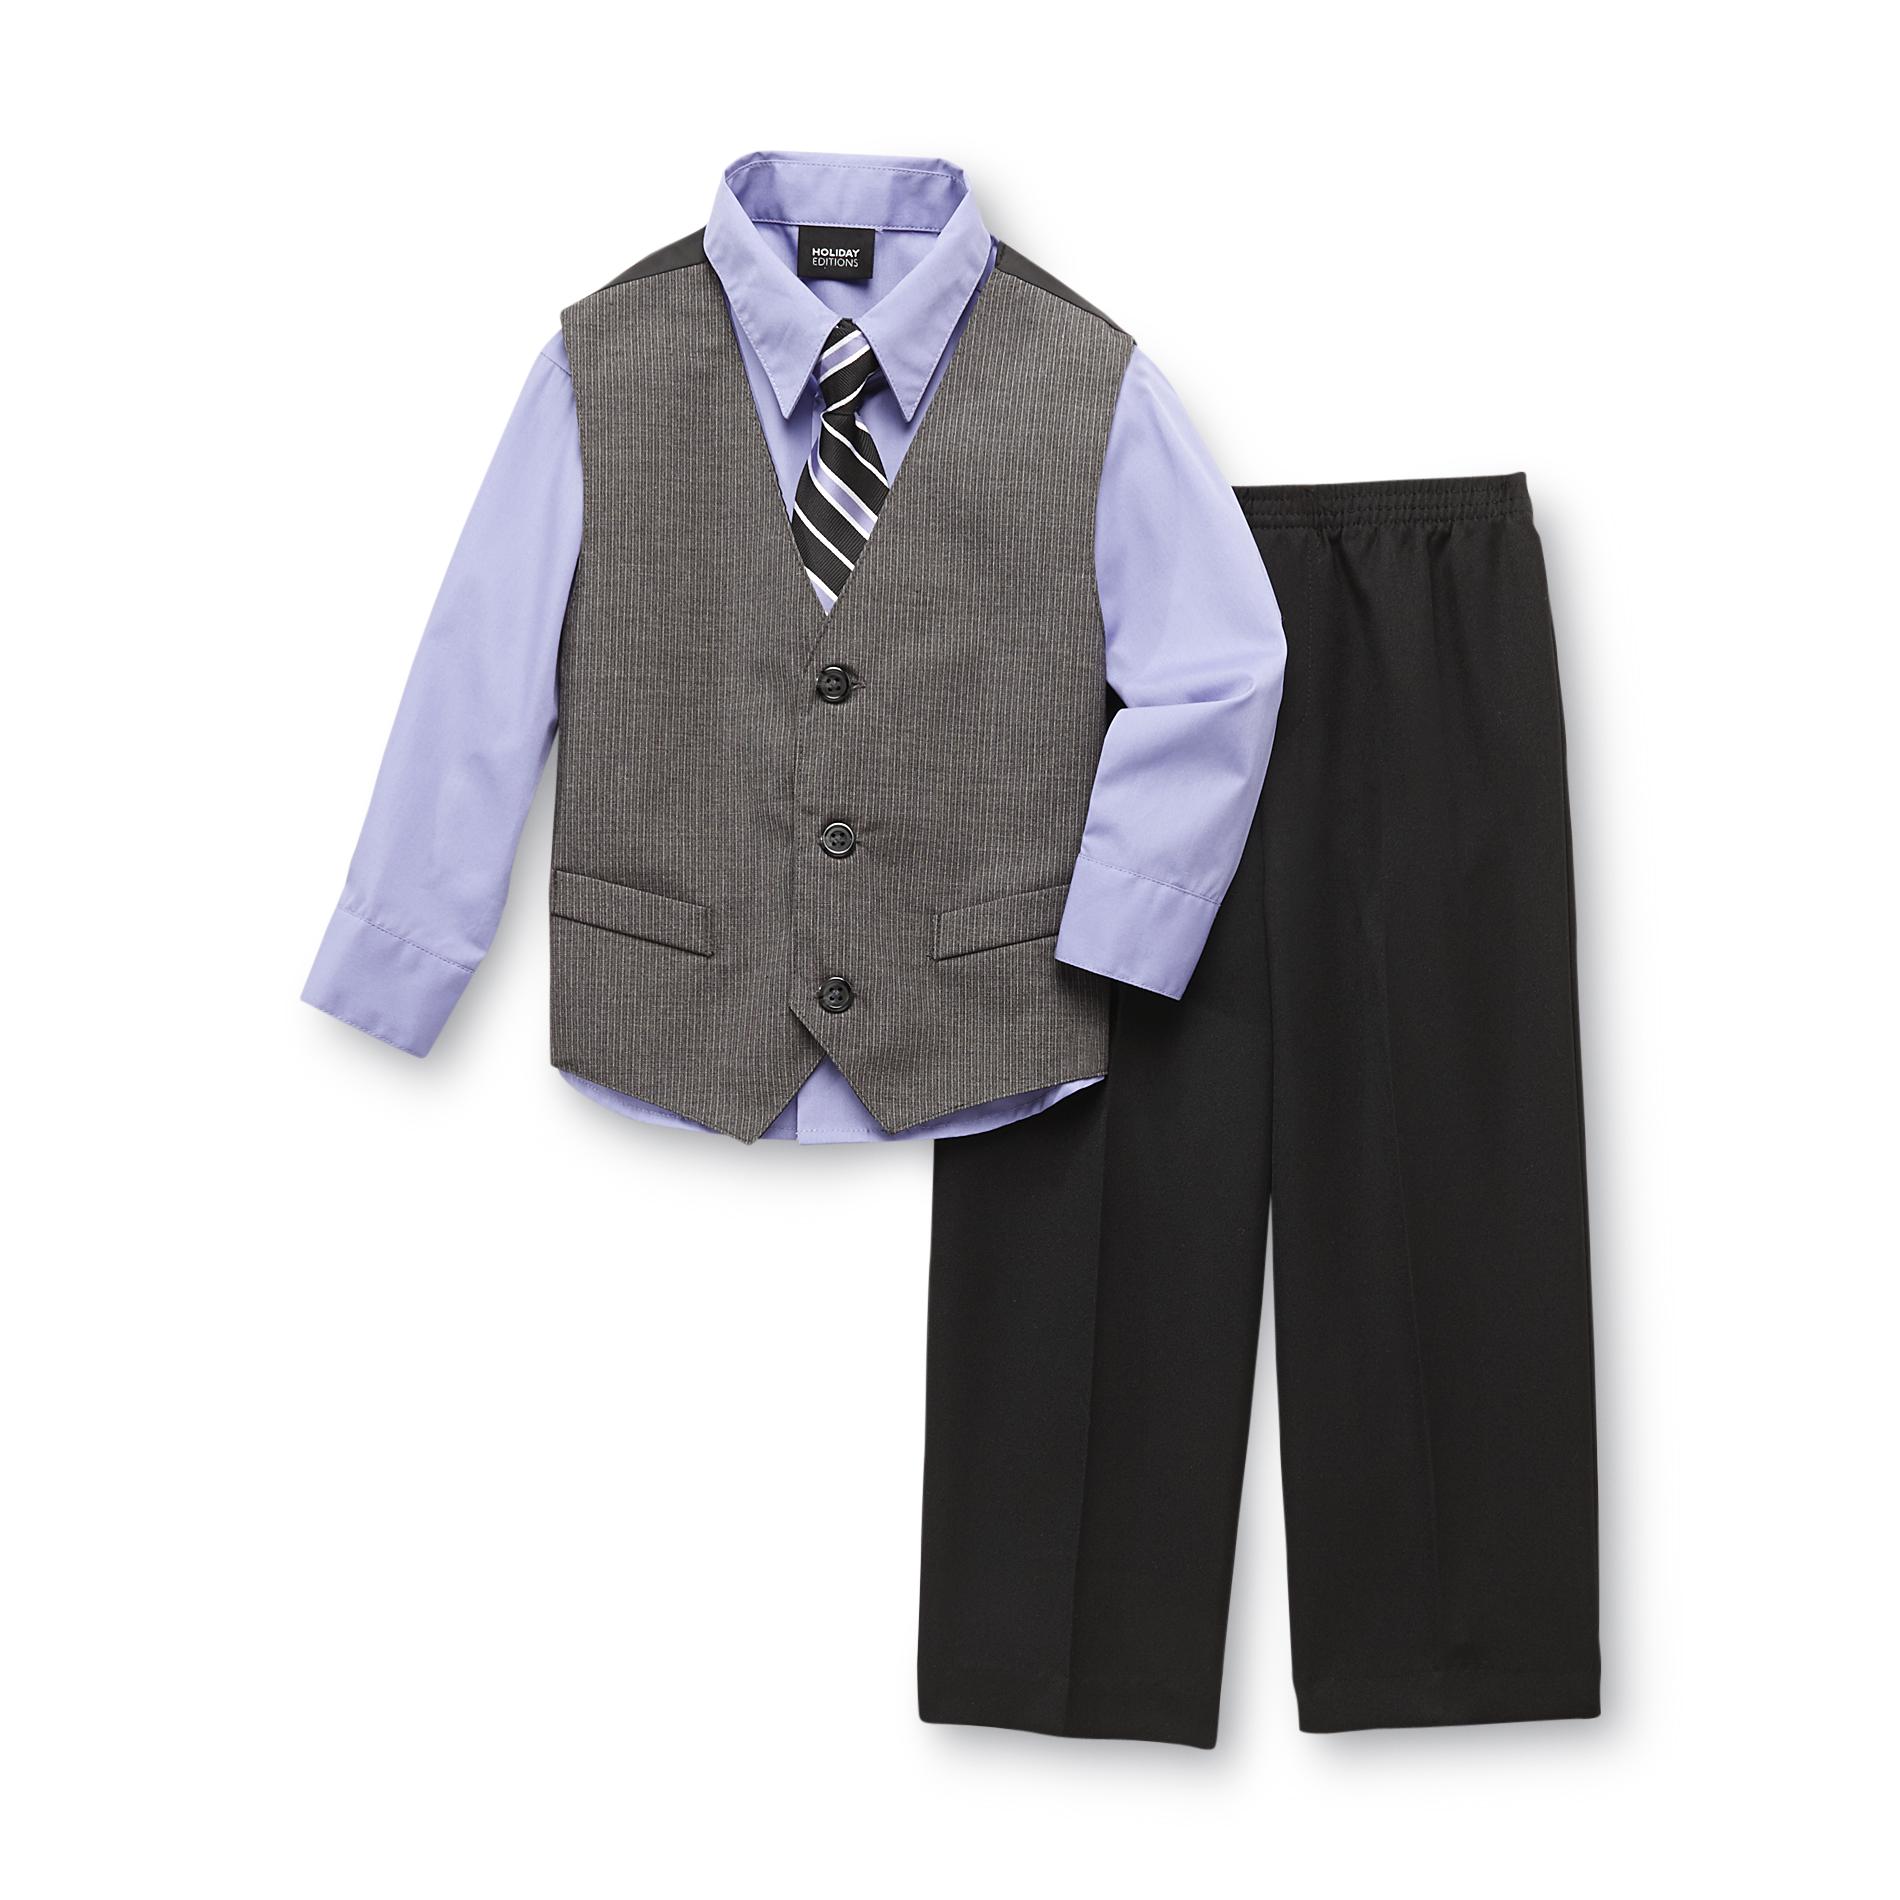 Holiday Editions Infant & Toddler Boy's 4-Piece Suit - Pinstriped